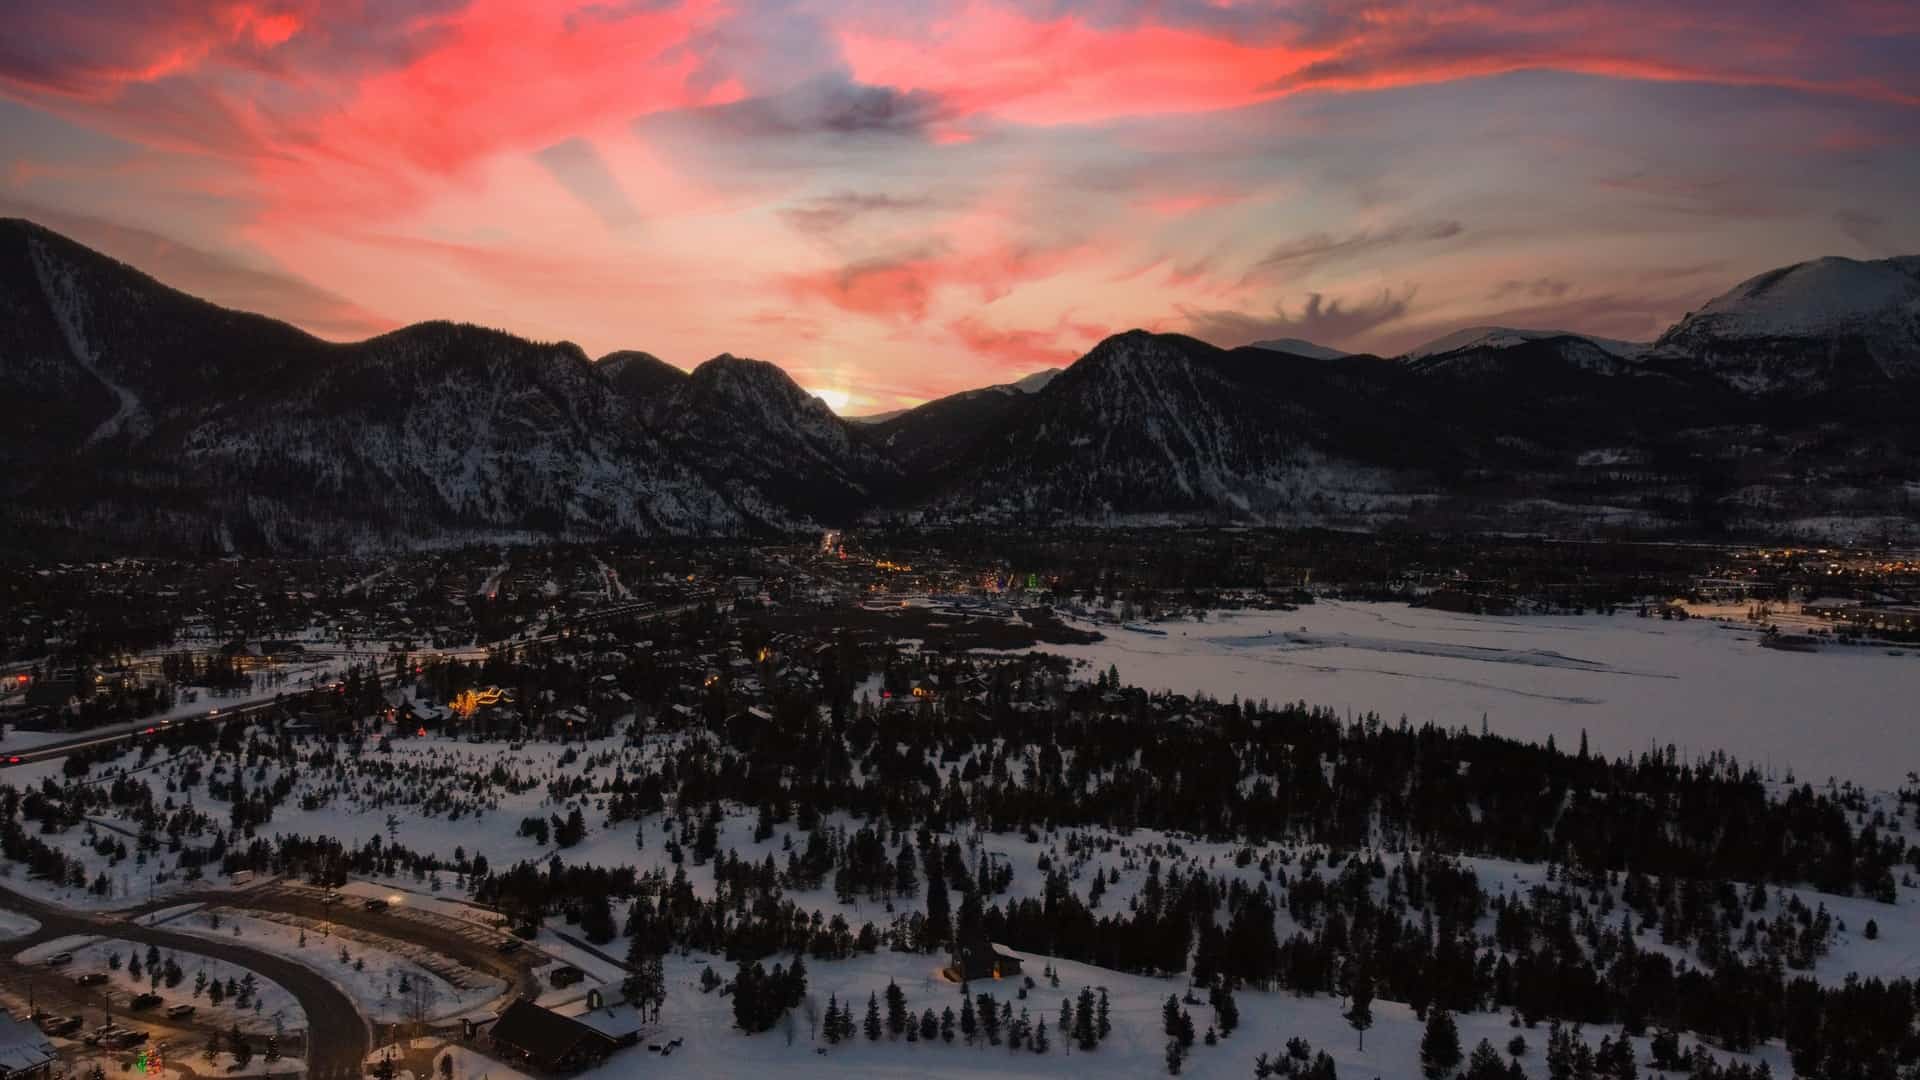 The tow of Frisco at sunset with a frozen lake Dillon